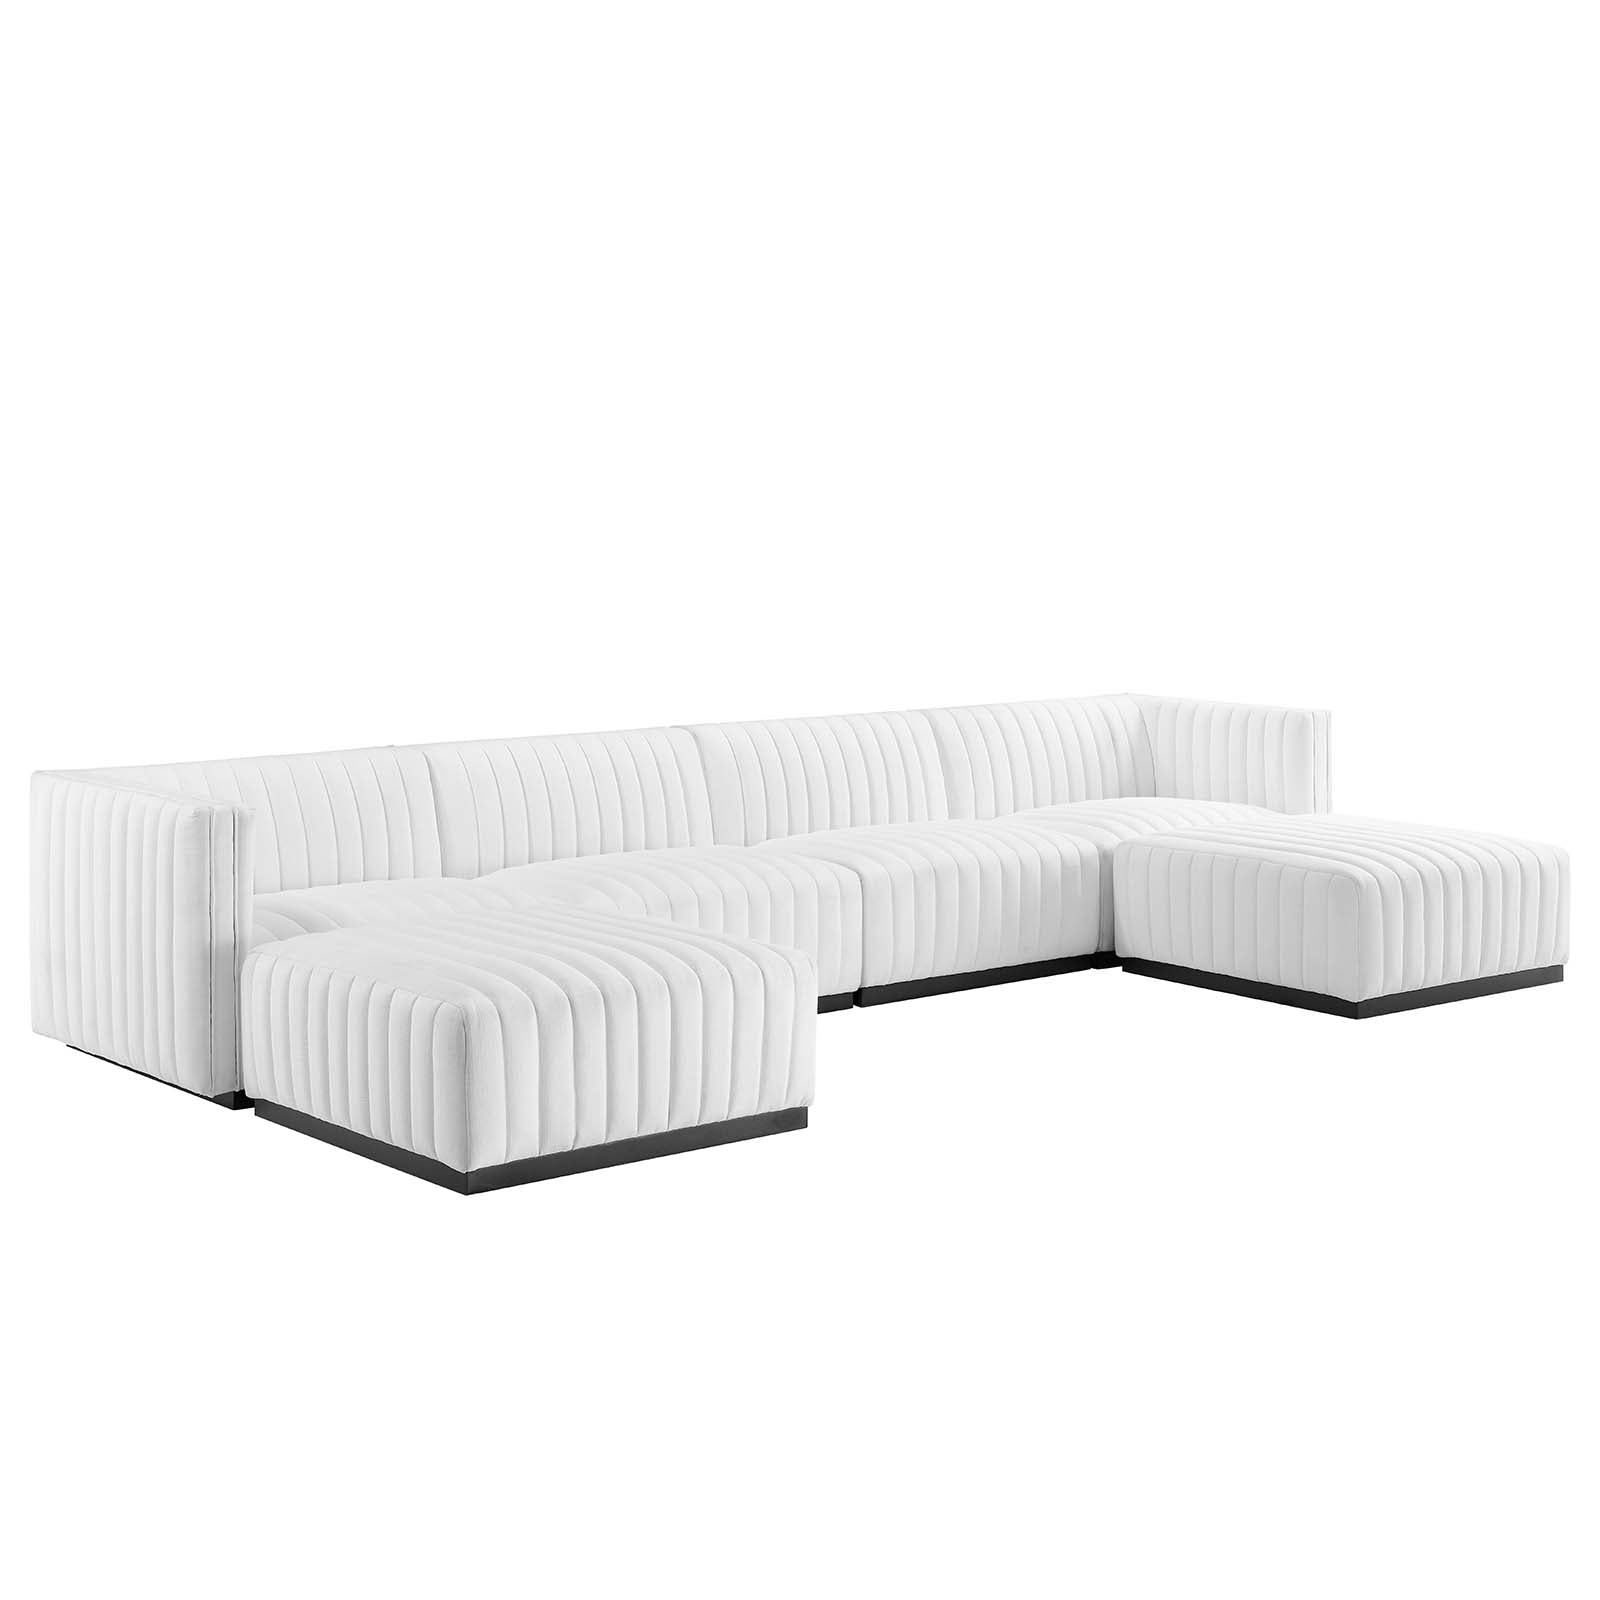 Modway Sectional Sofas - Conjure Channel Tufted Upholstered Fabric 6-Piece Sectional Sofa BlackWhite